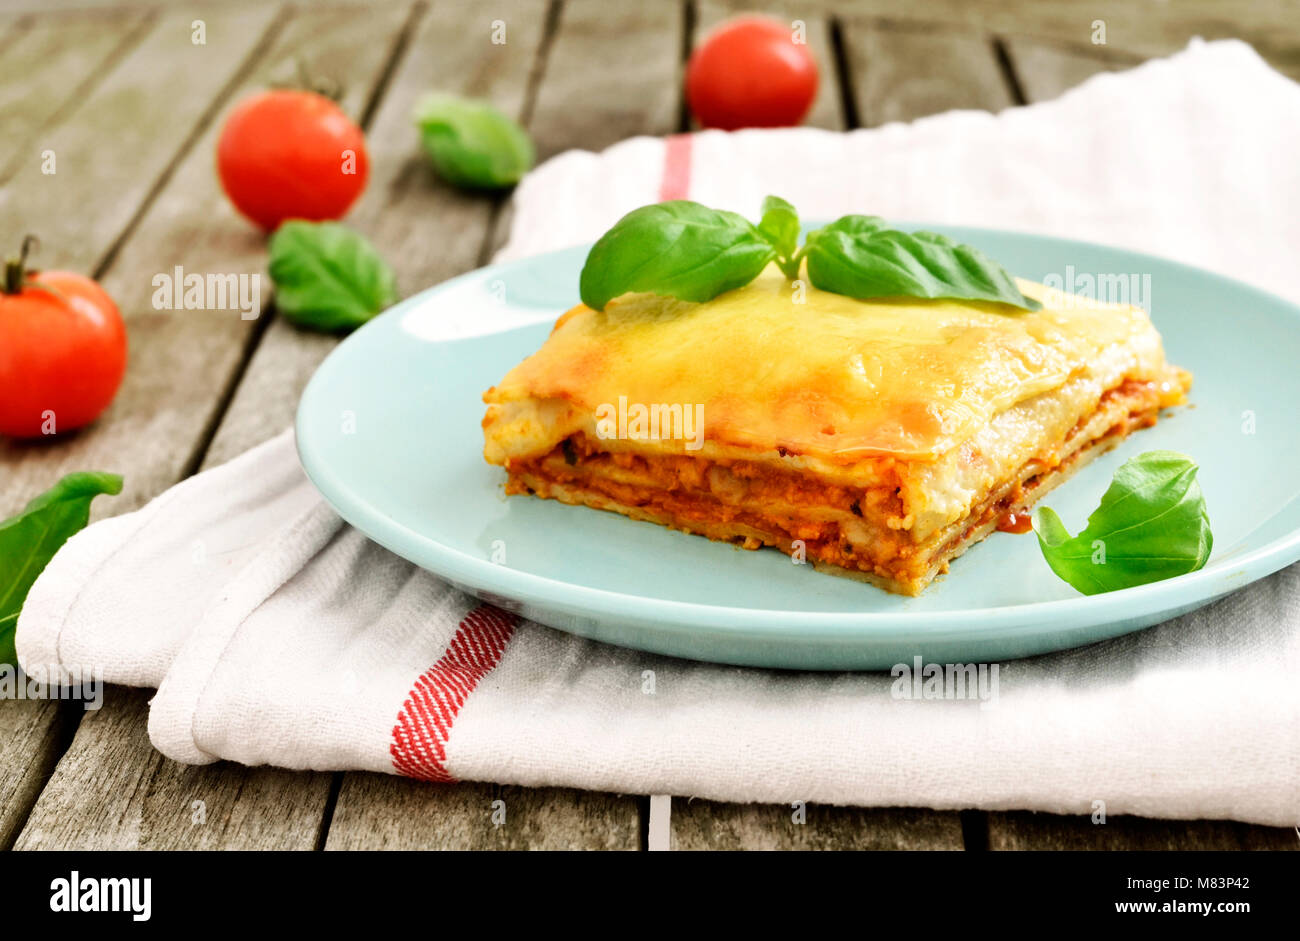 Fresh meat lasagne, lasagne bolognese, pasta dish on a wooden table with decorative basil leaf. Italian cuisine. Stock Photo